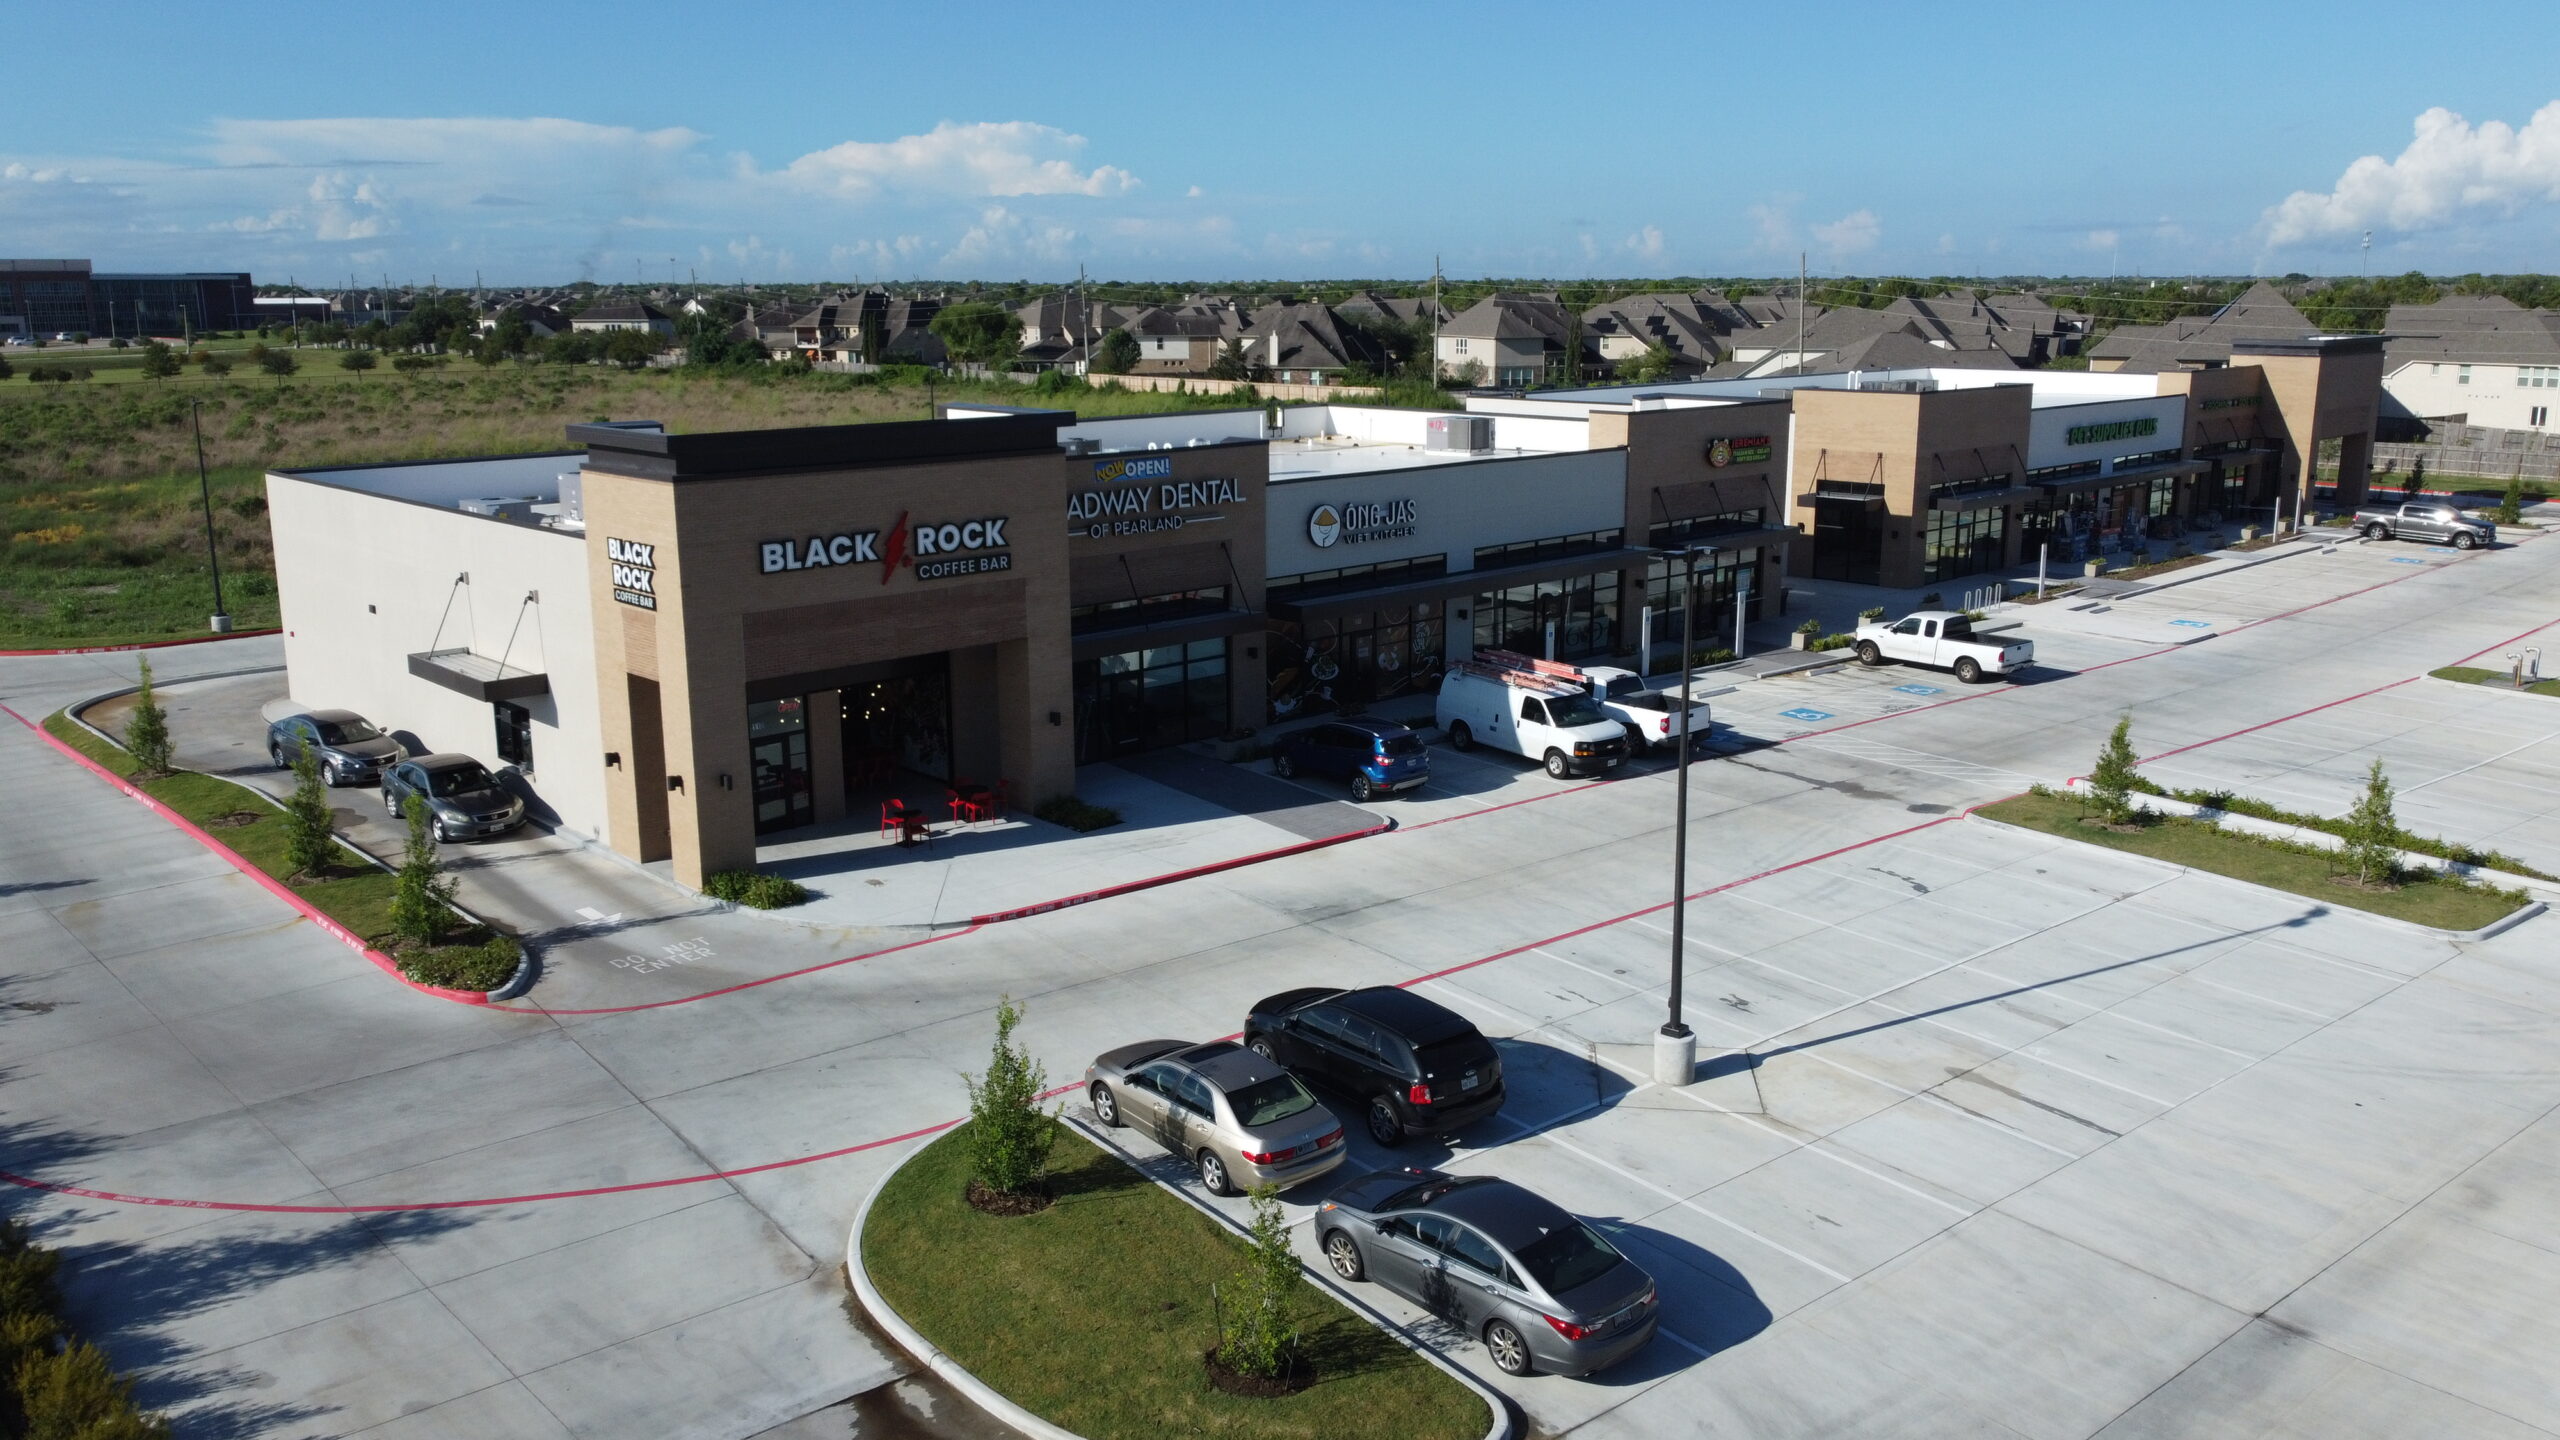 Partners Capital sells Phase I of Broadway Plaza Shopping Center development in Pearland